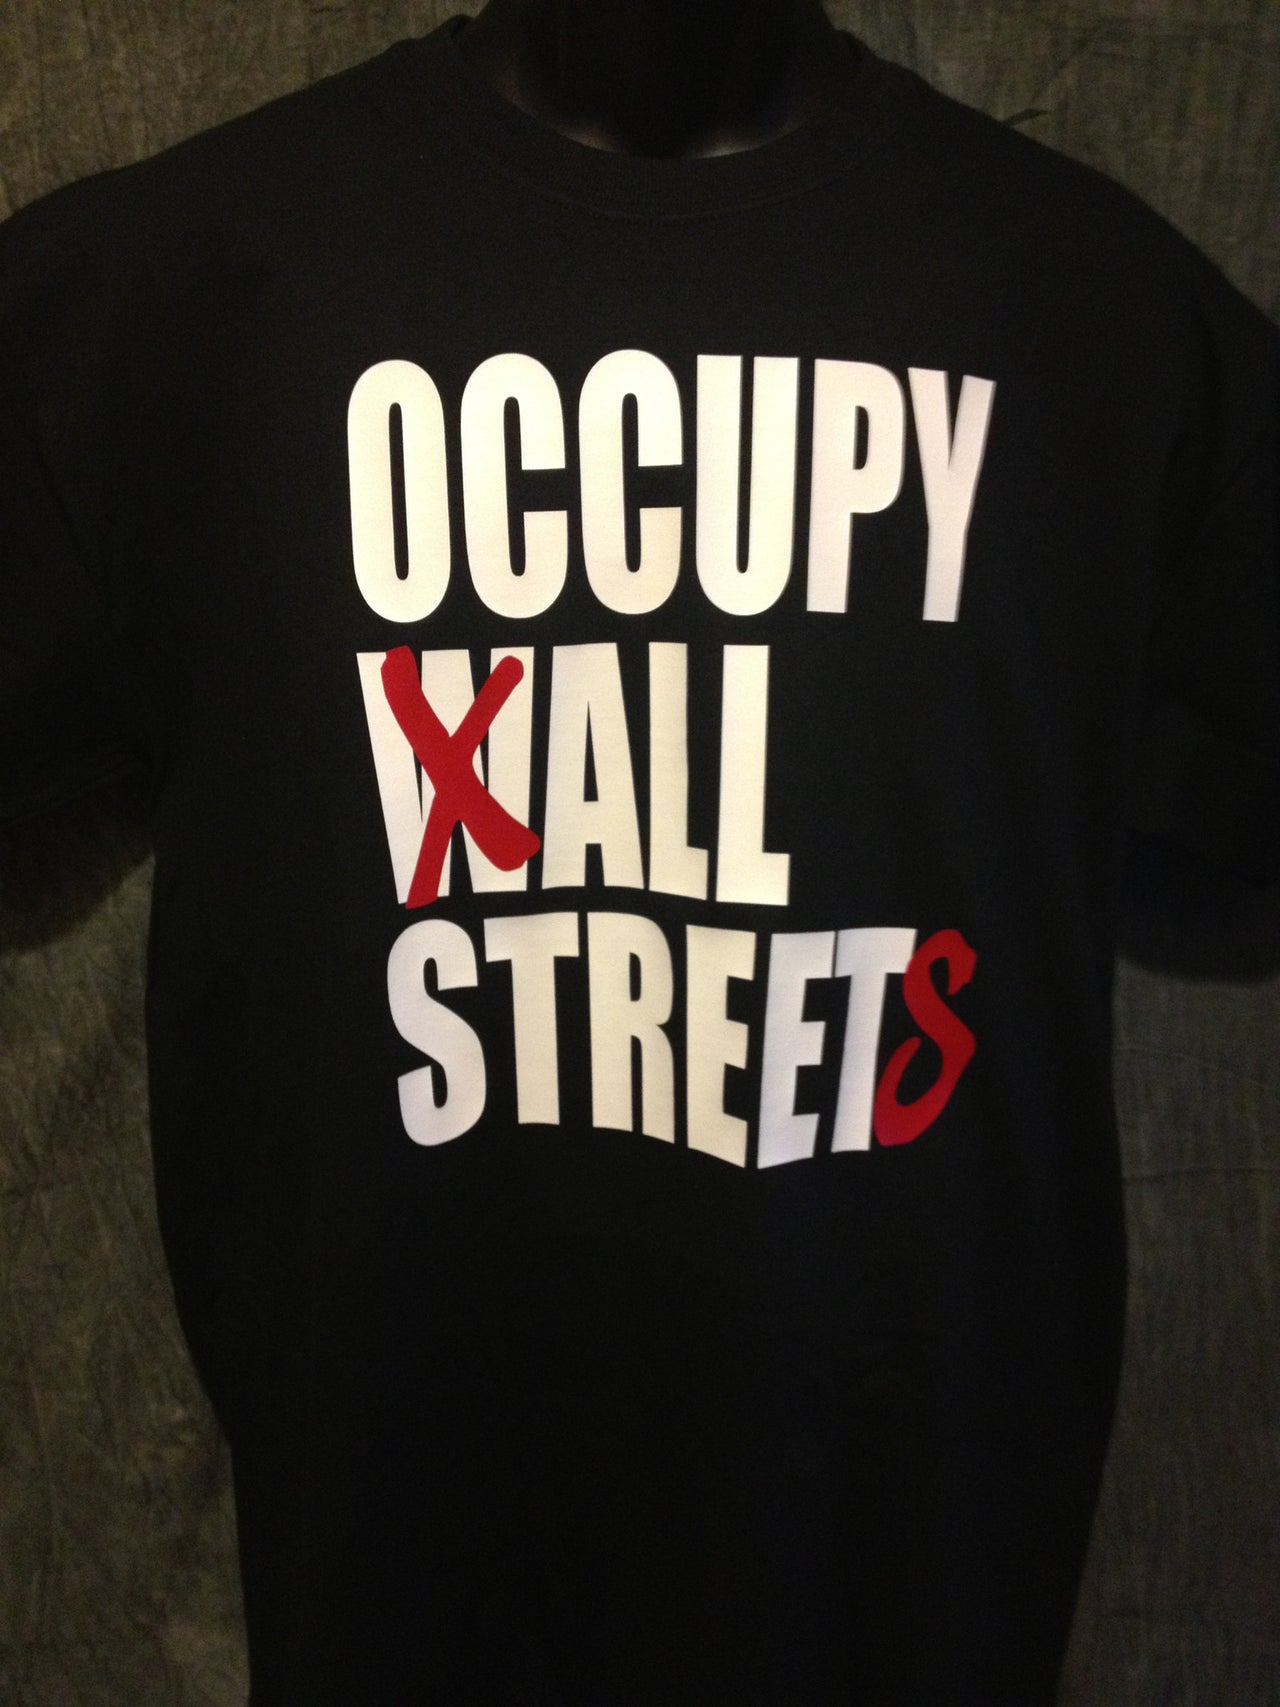 Occupy All Streets Tshirt: Black With White and Red Print - TshirtNow.net - 6